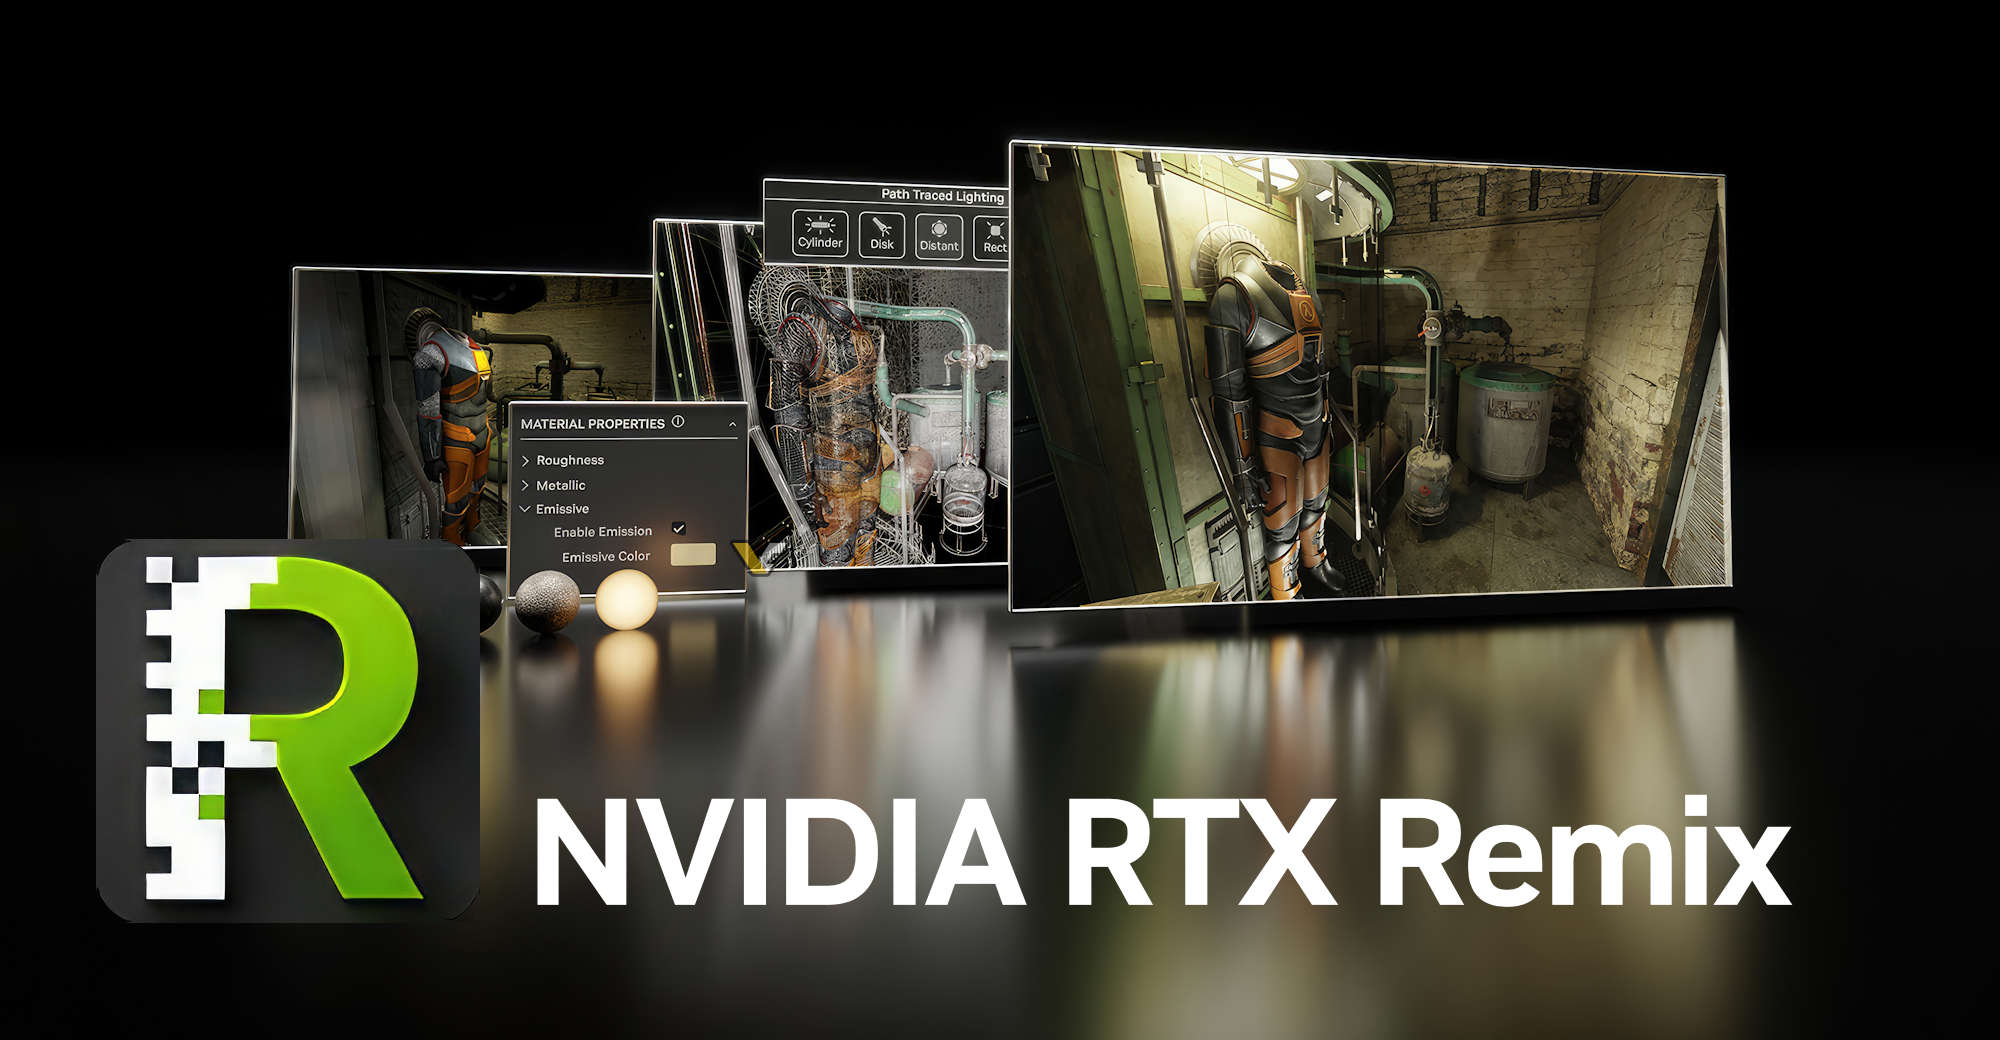 NVIDIA launches RTX Remix 0.4 open beta, making remastering of classic games easier